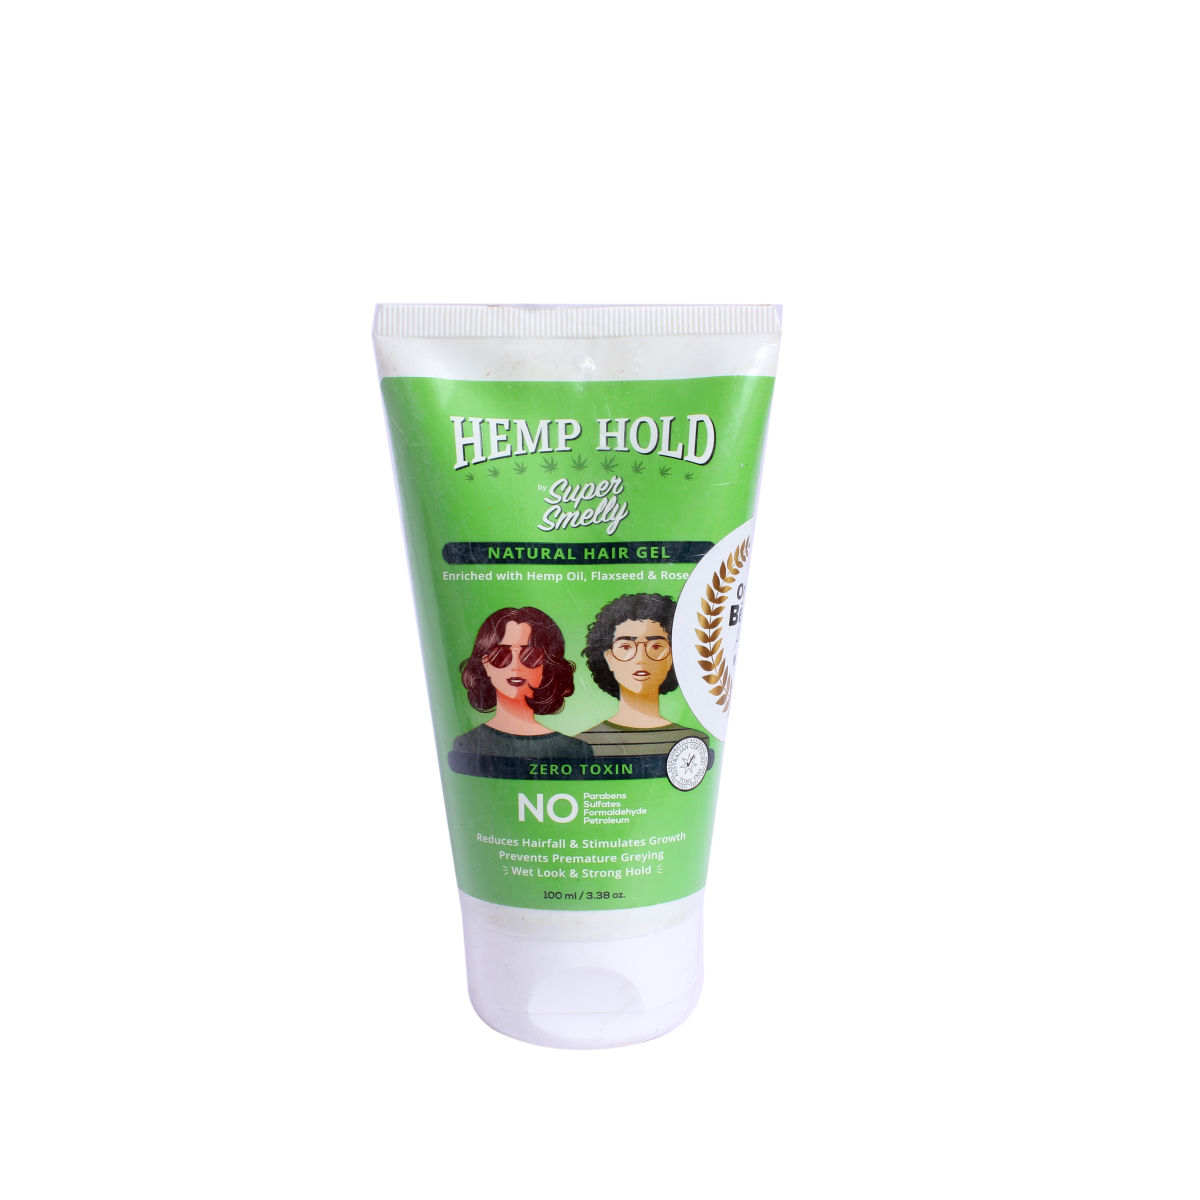 Super Smelly Hemp Hold Natural Hair Gel, 100 ml Price, Uses, Side Effects,  Composition - Apollo Pharmacy